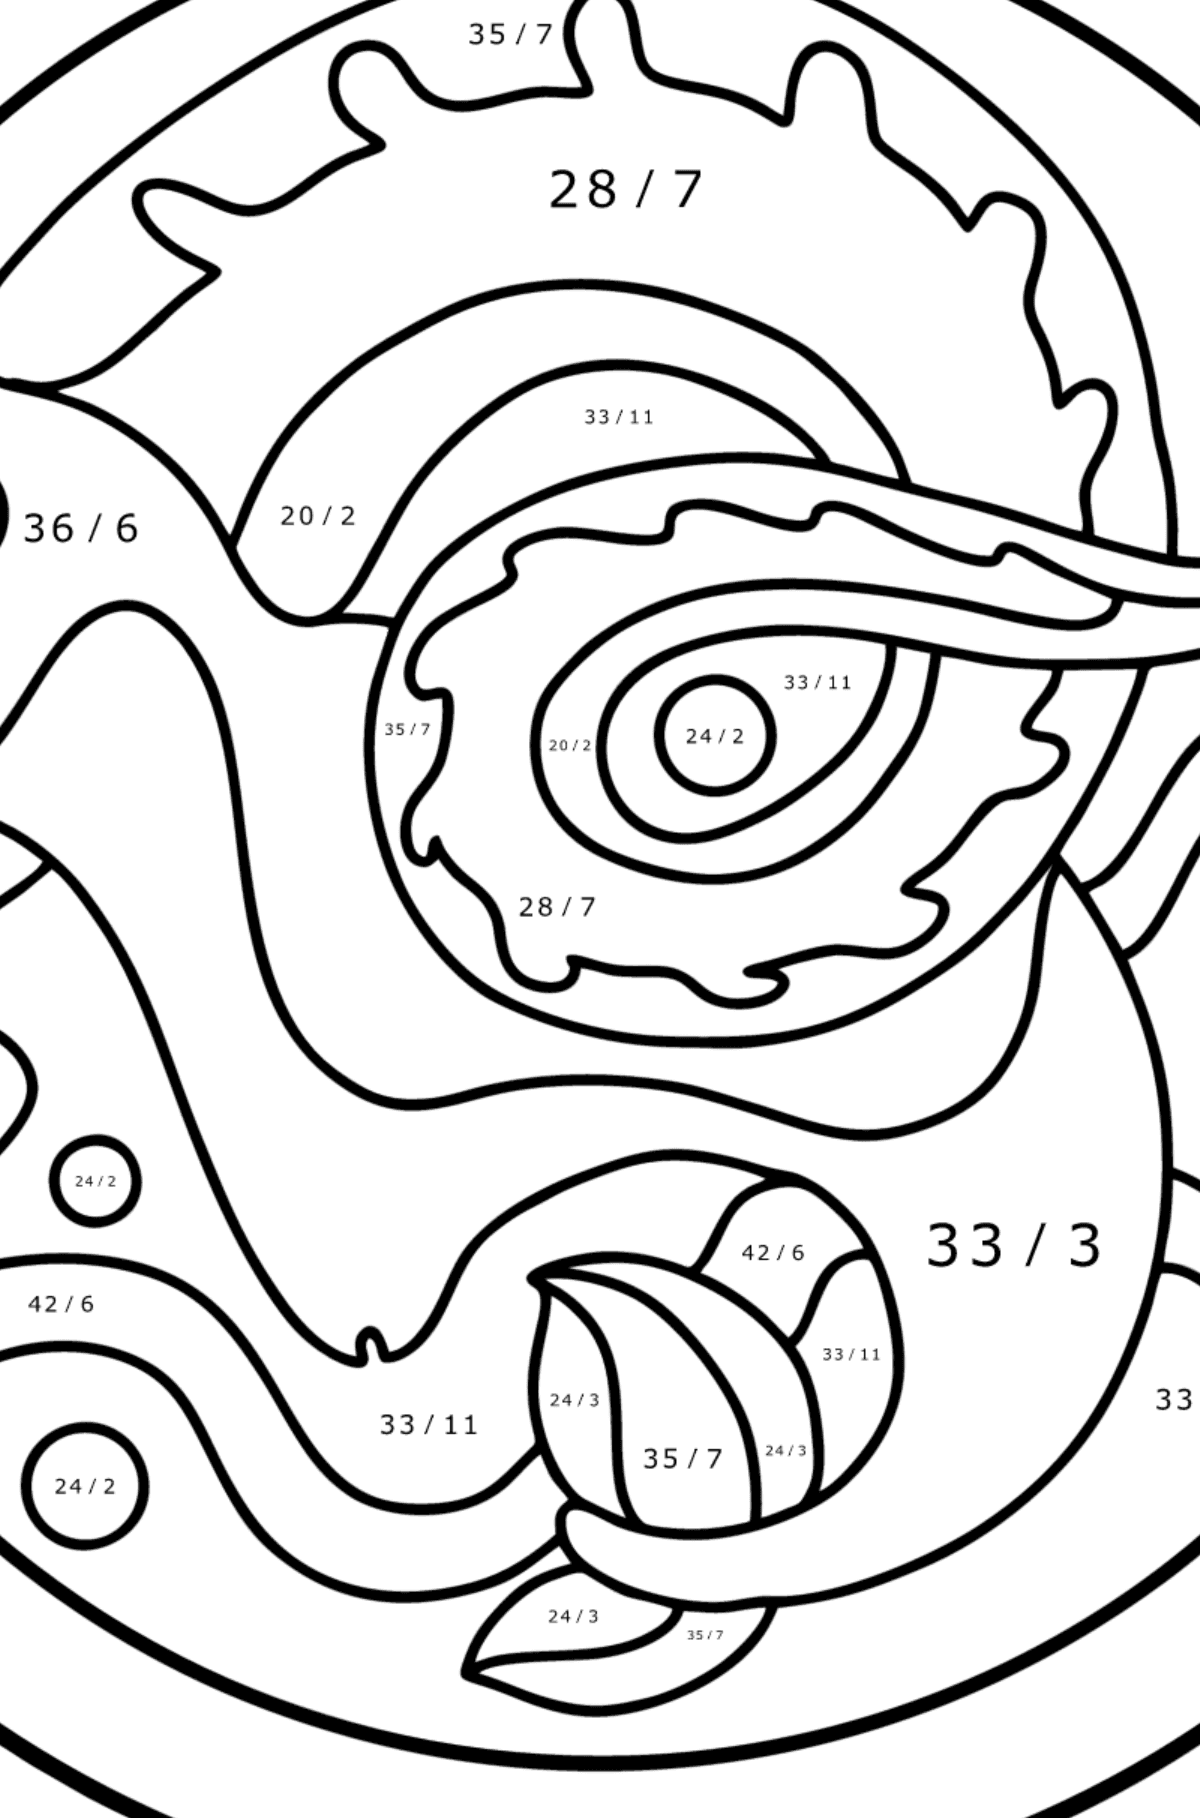 Coloring page for kids - Capricorn zodiac sign - Math Coloring - Division for Kids